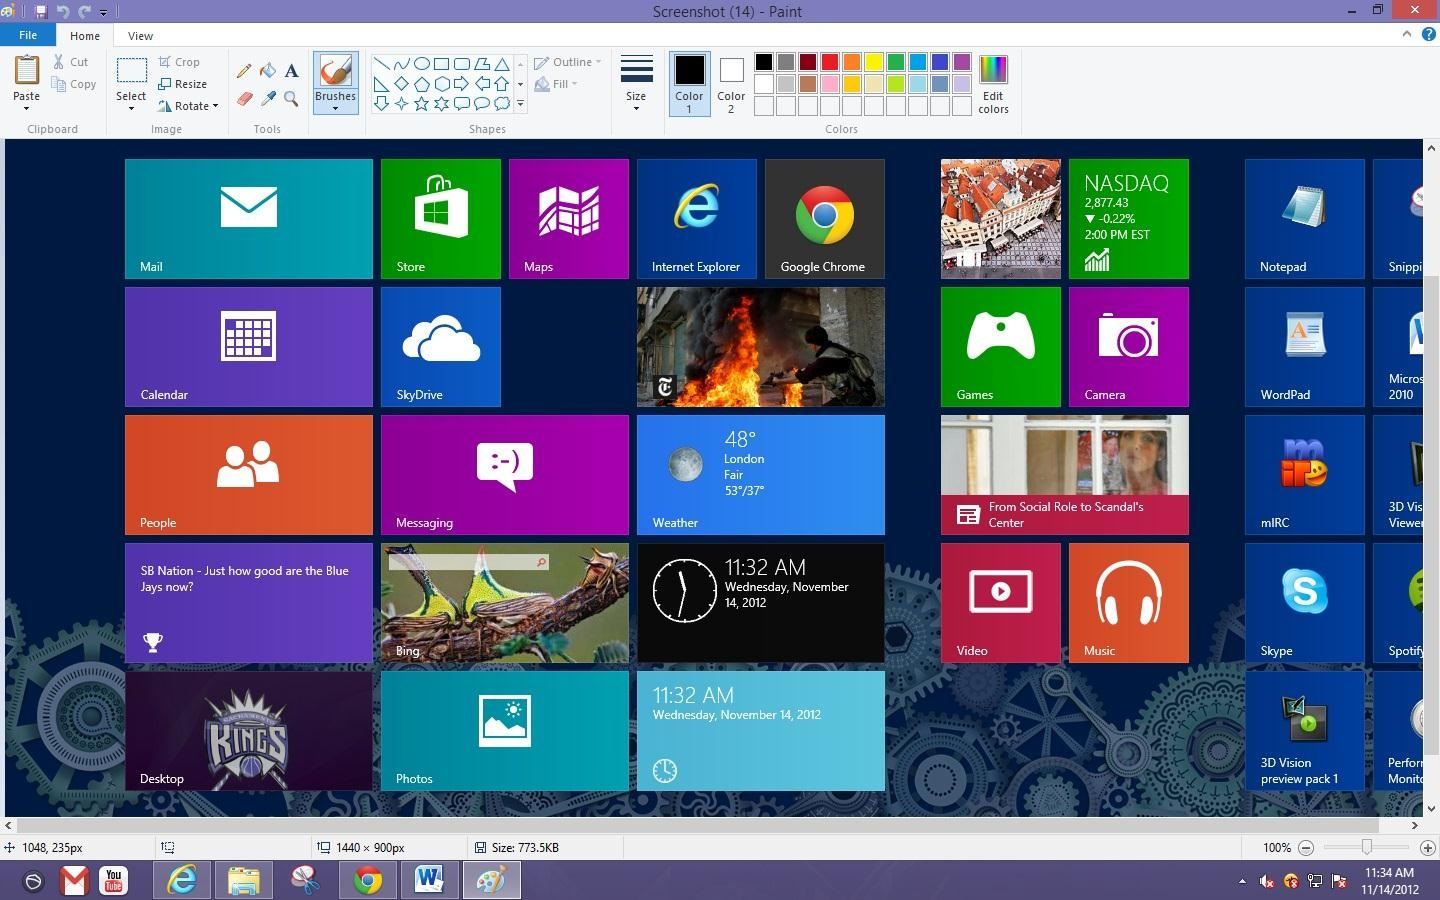 How to Take Screenshots (And Crop Them) in Windows 8